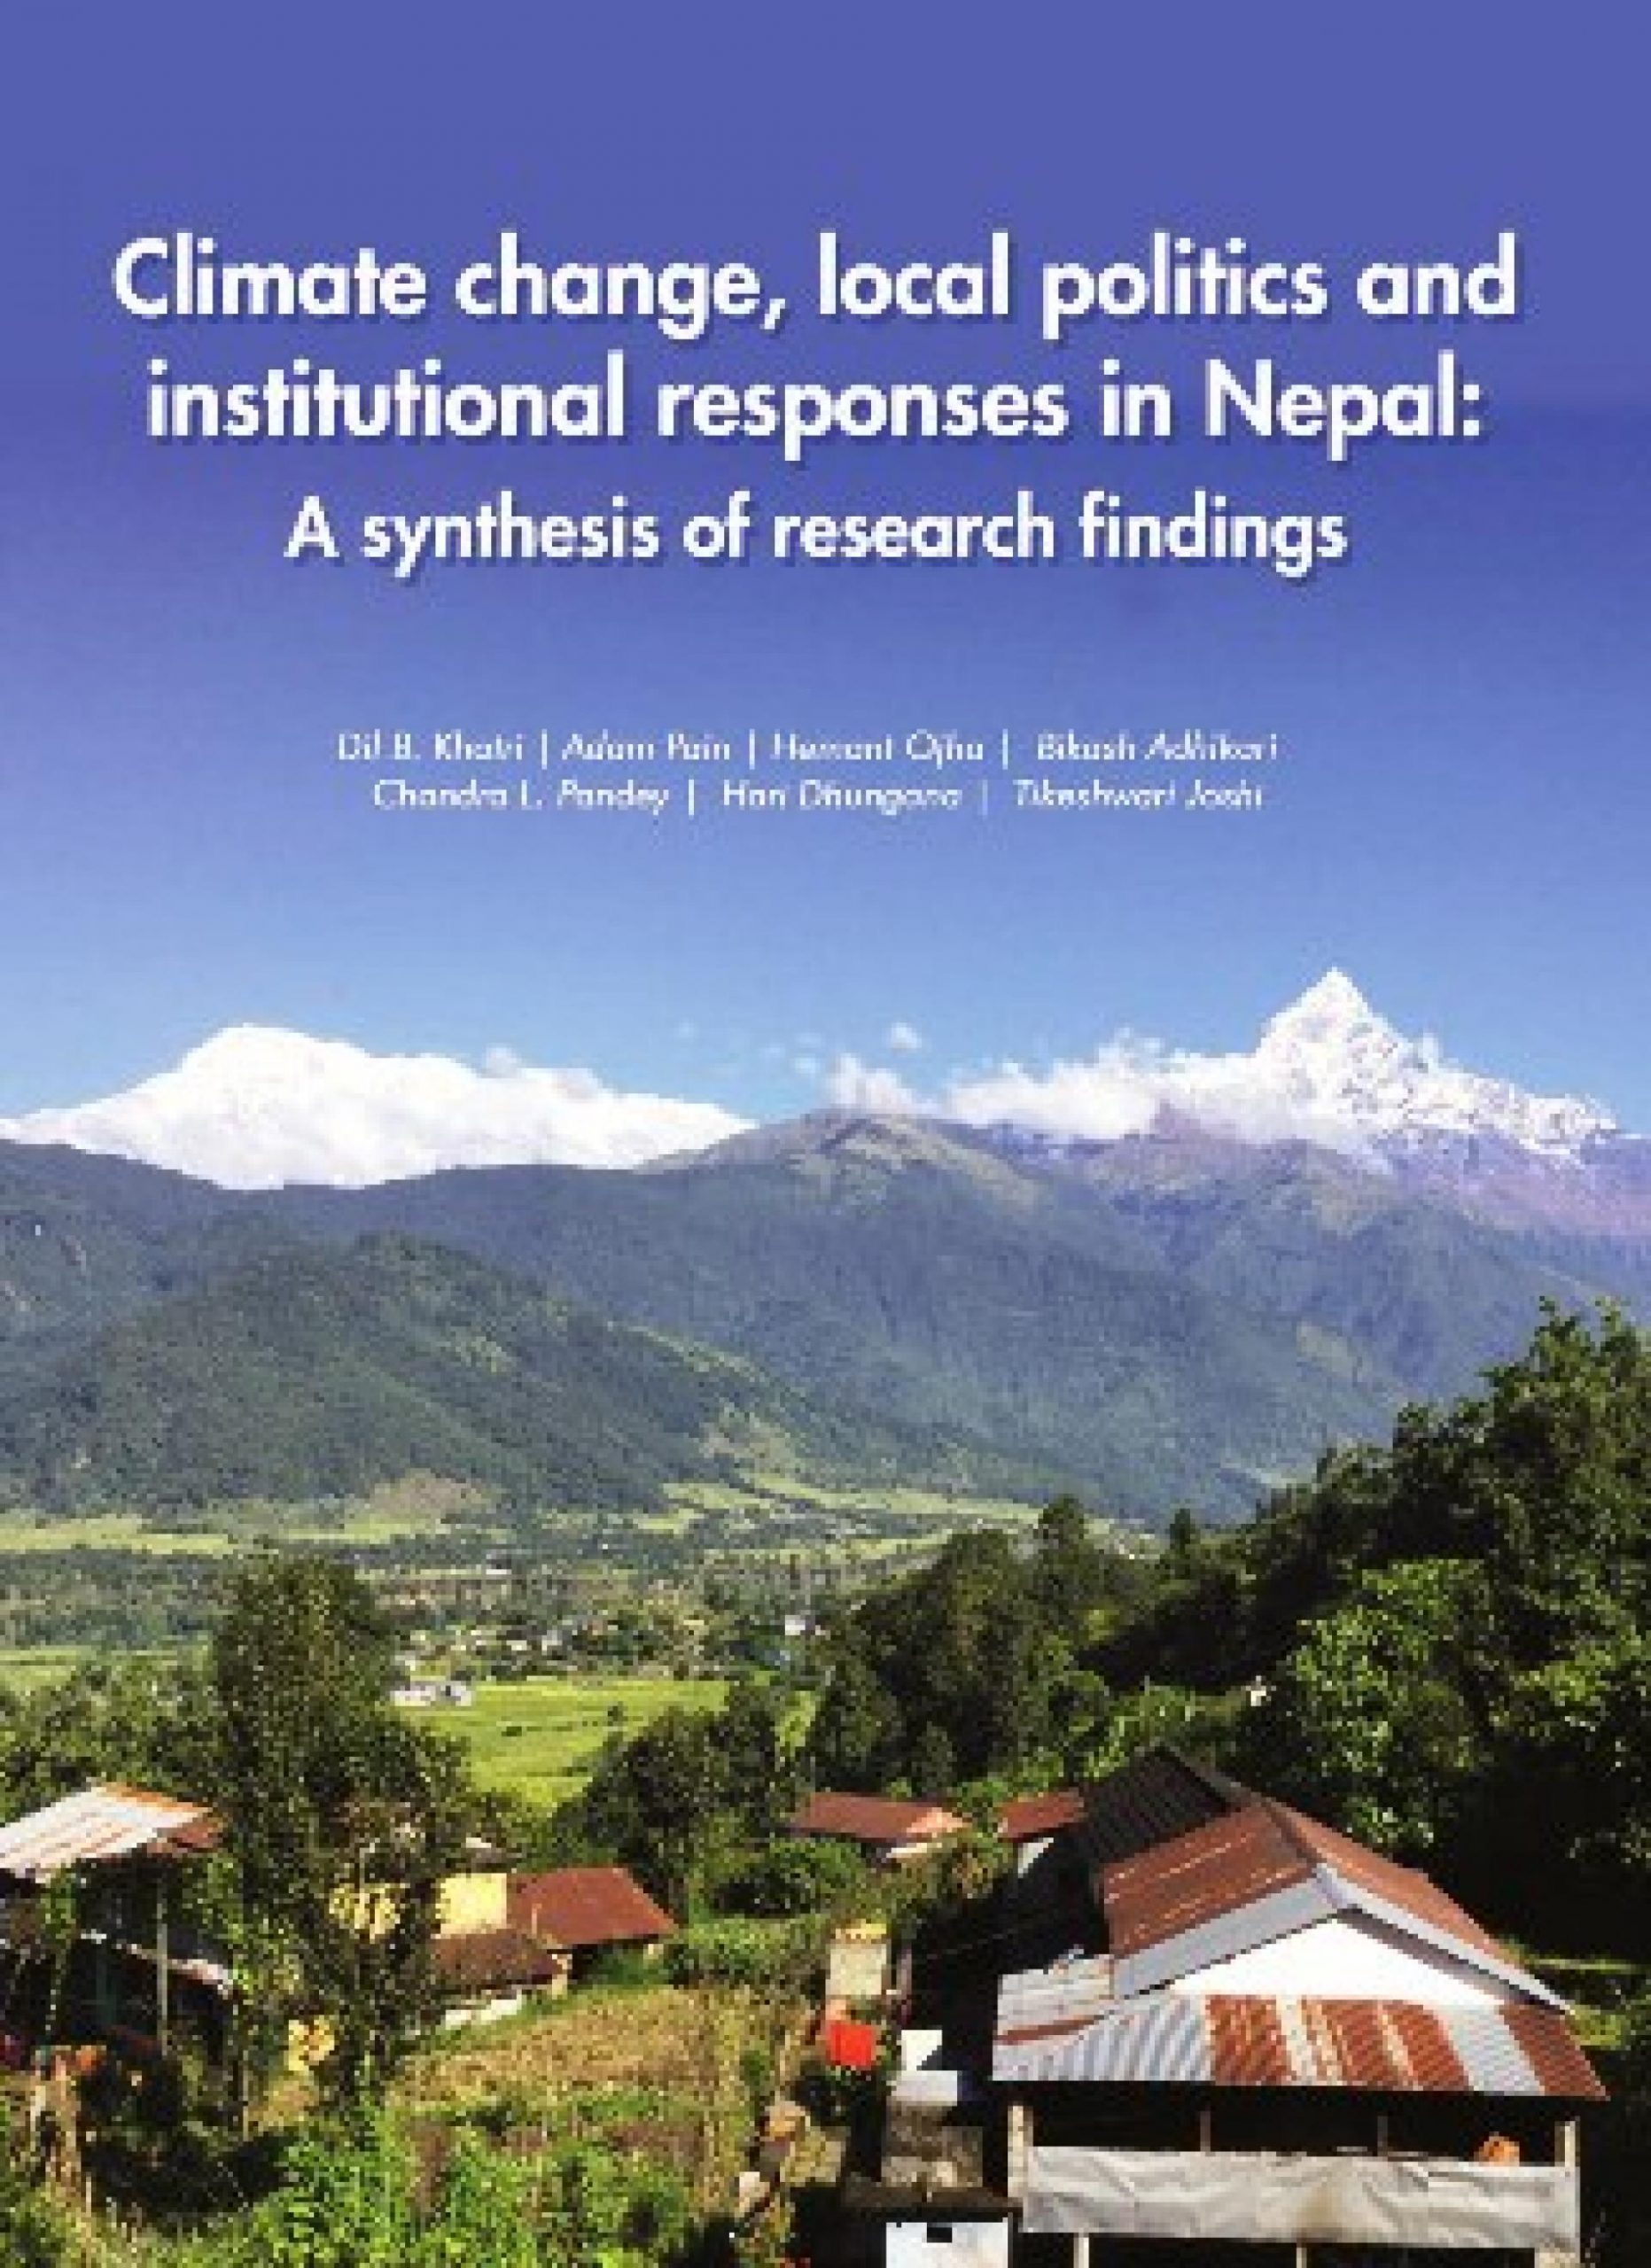 Climate change, local politics and institutional responses in Nepal: A synthesis of research findings